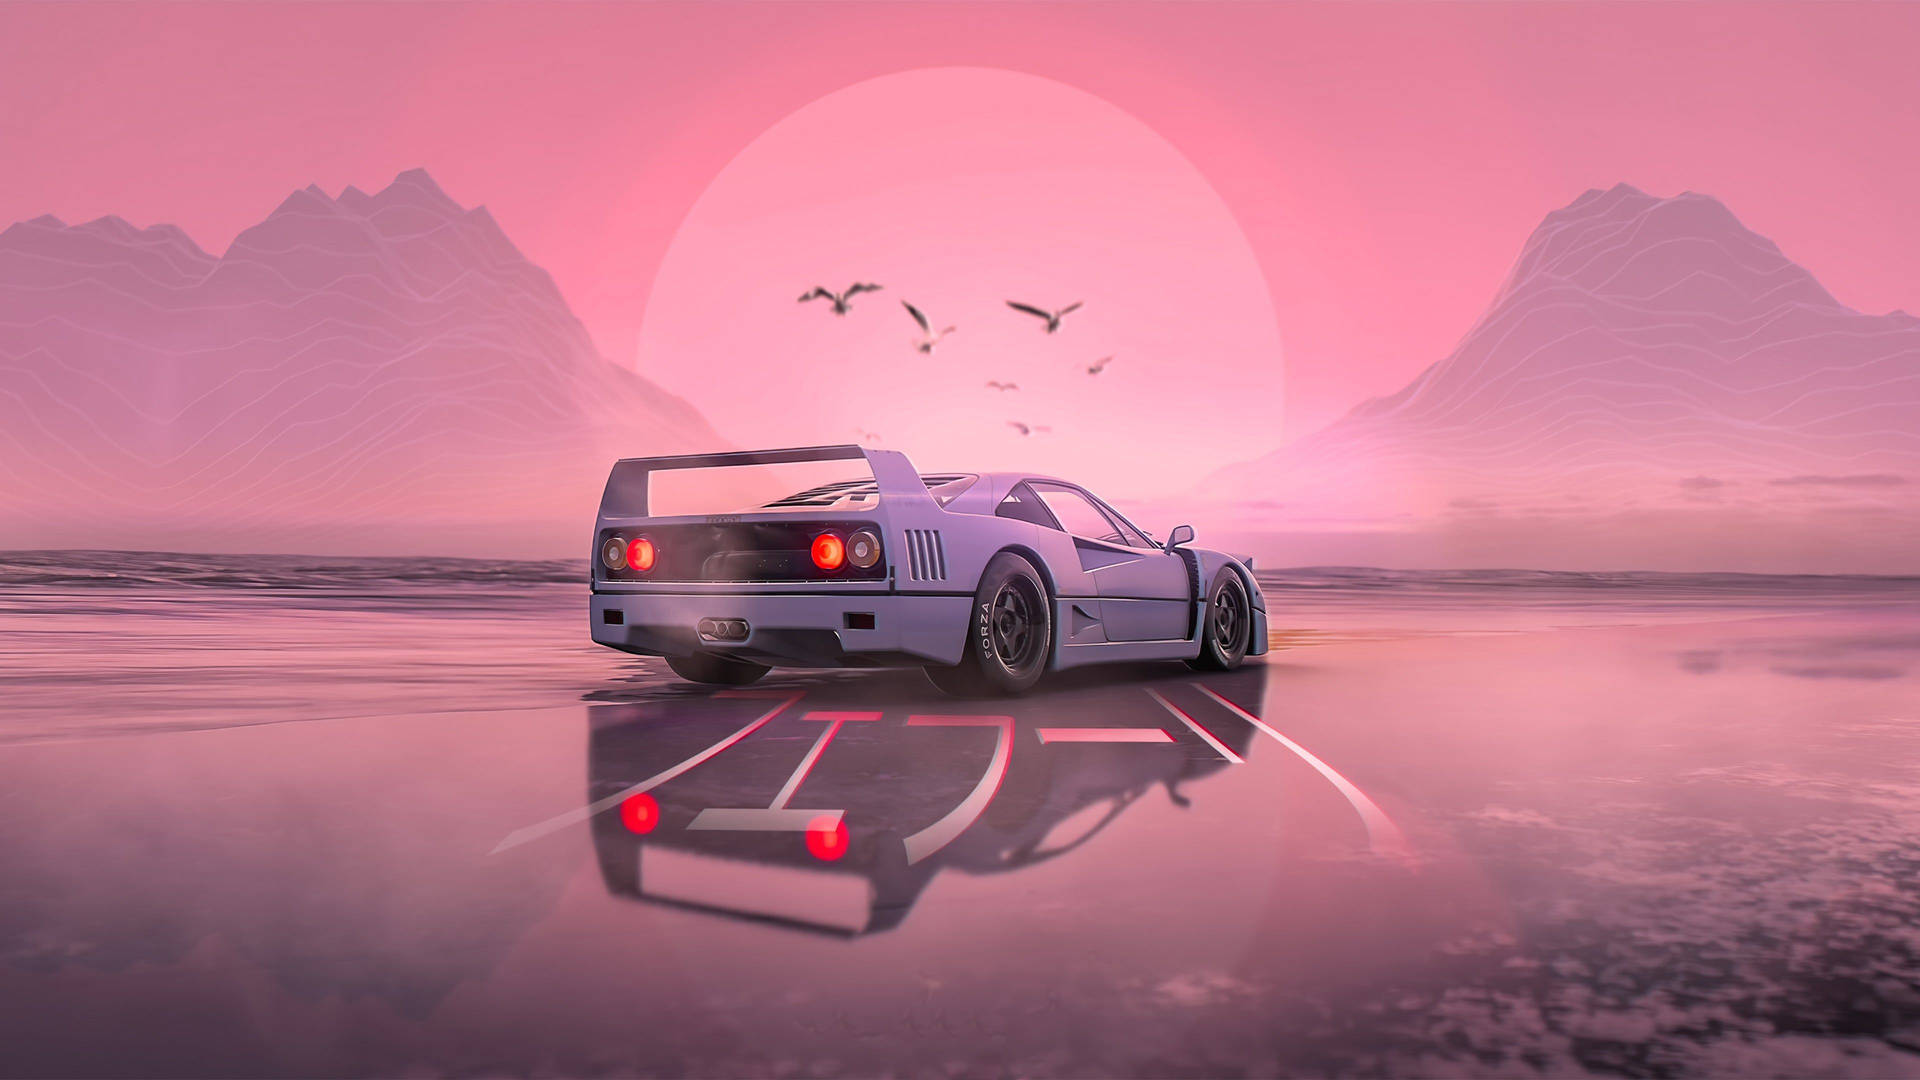 White JDM Car With Pink Sunset Wallpaper